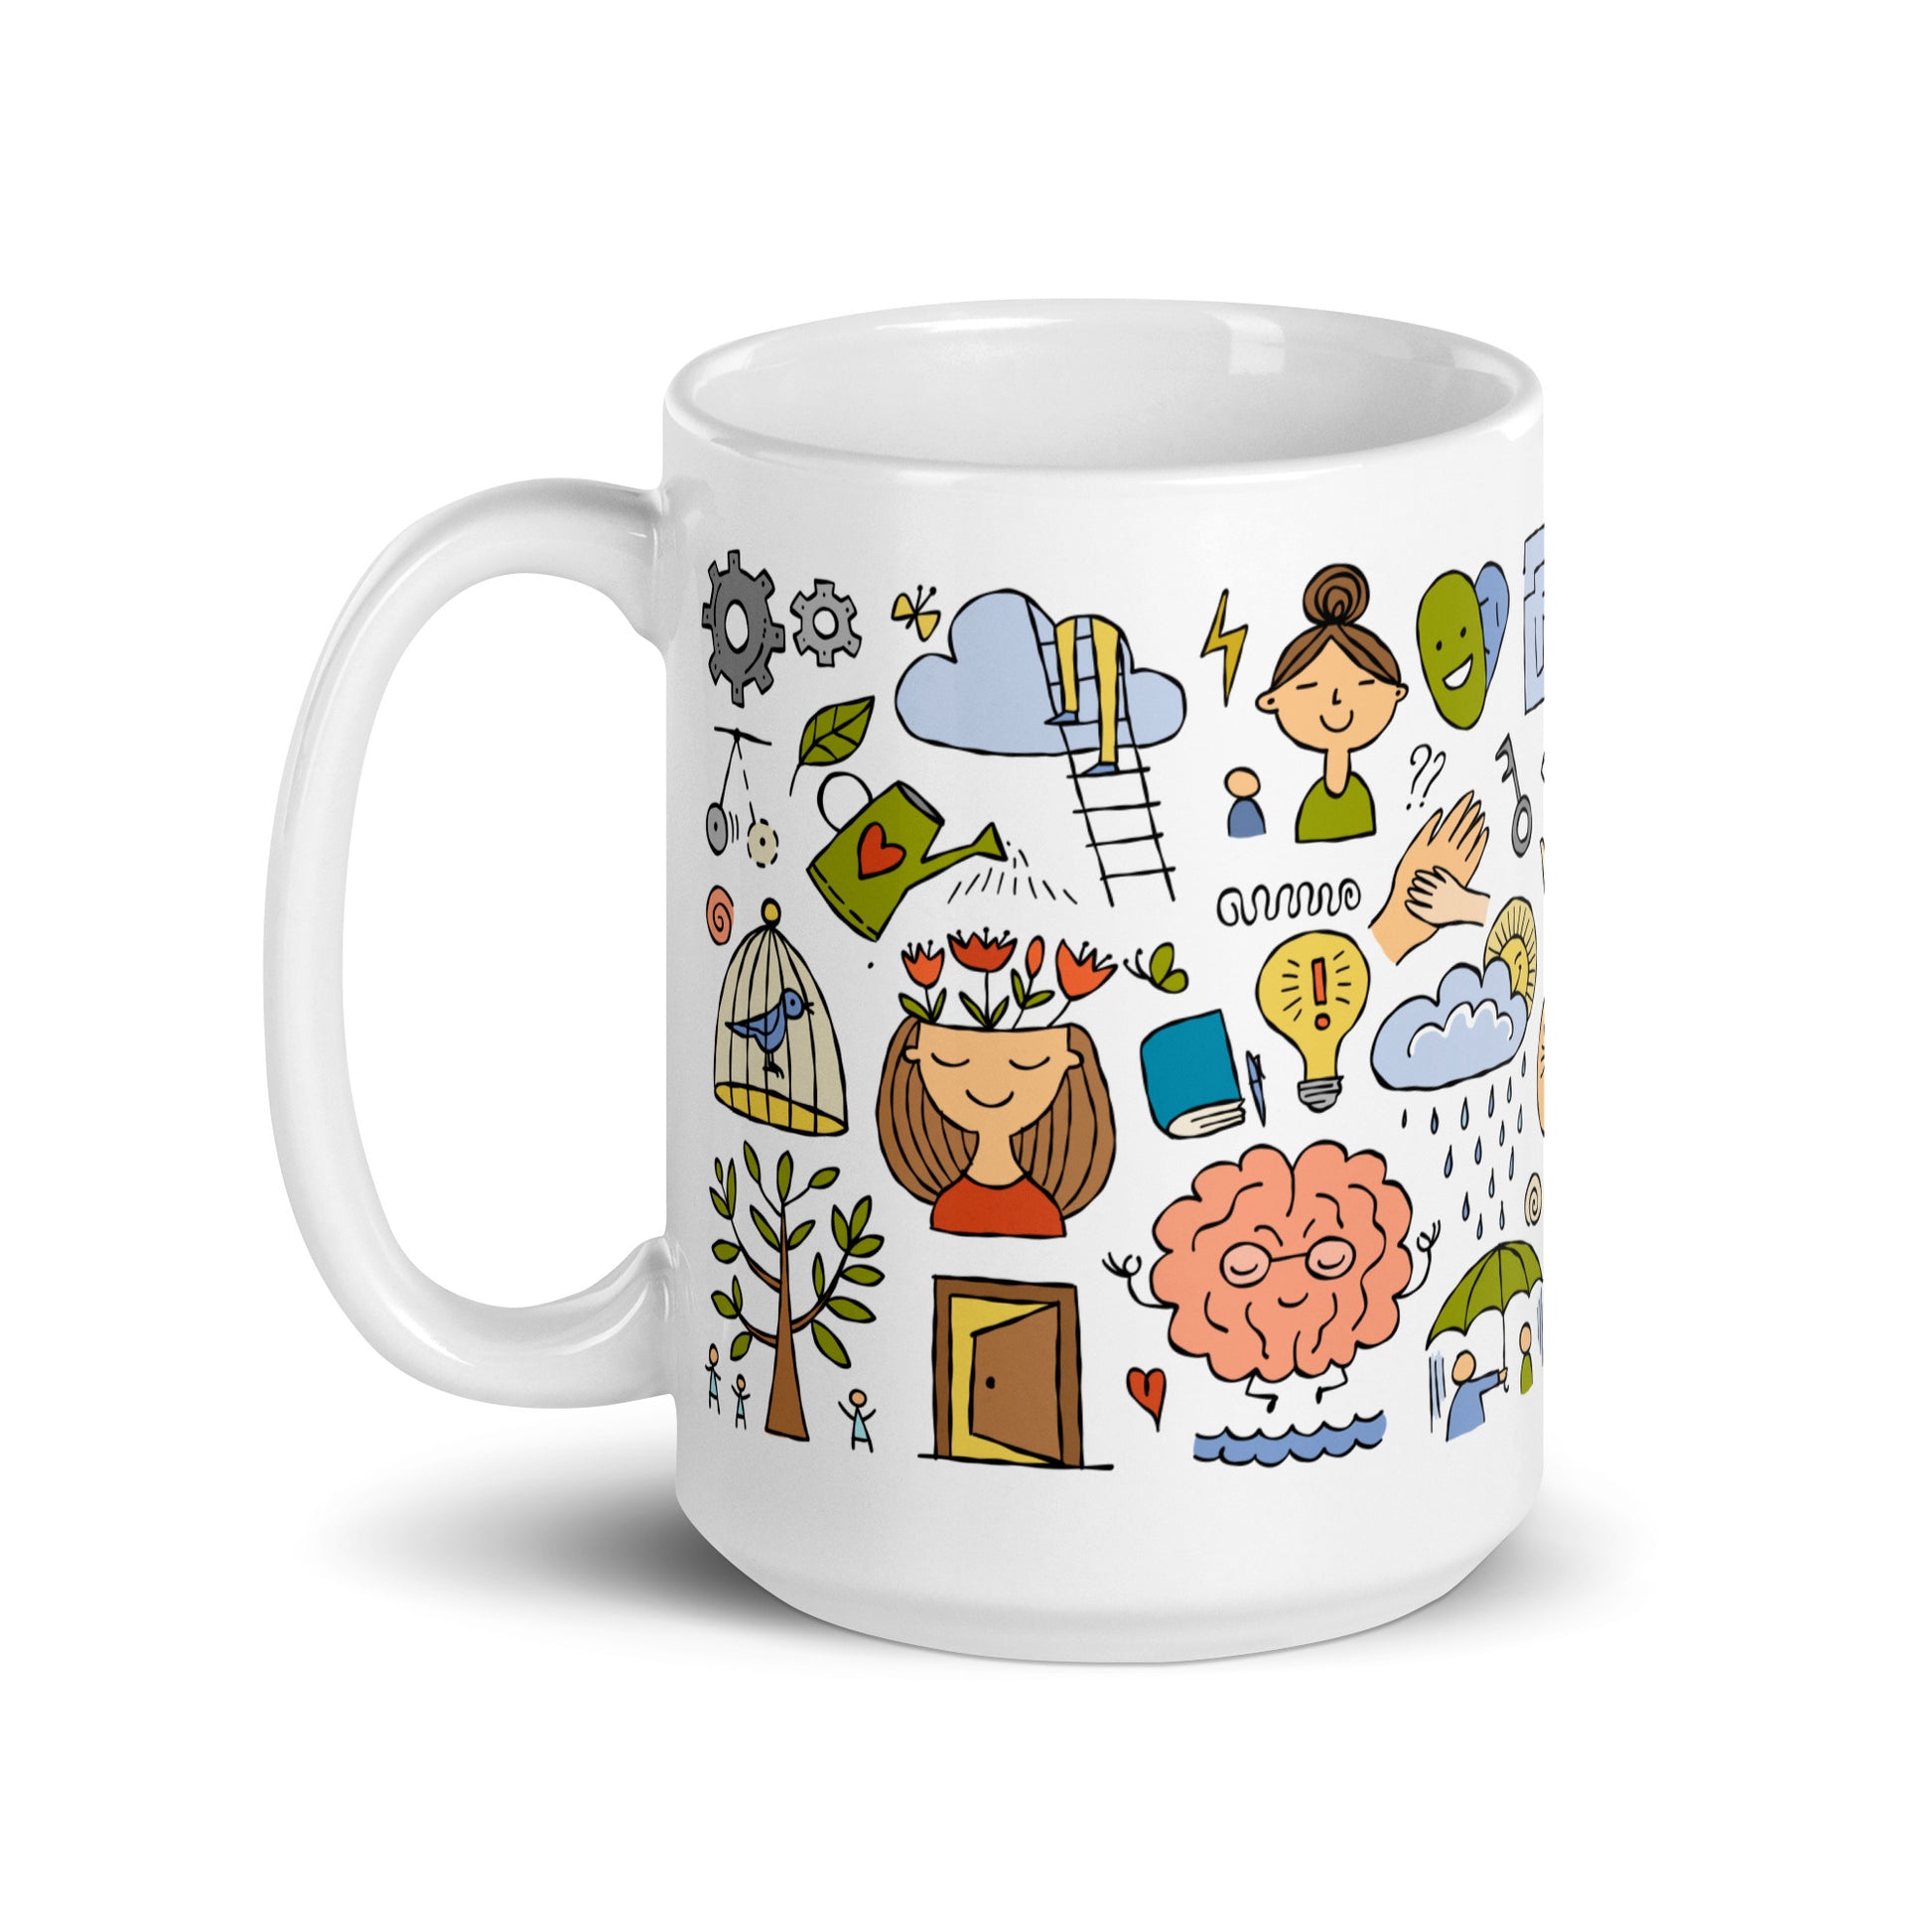 Personalized funny Psychology concept art mug 15oz with the quote "Change your thoughts and you change your world" by Norman Vincent Peale. Left side